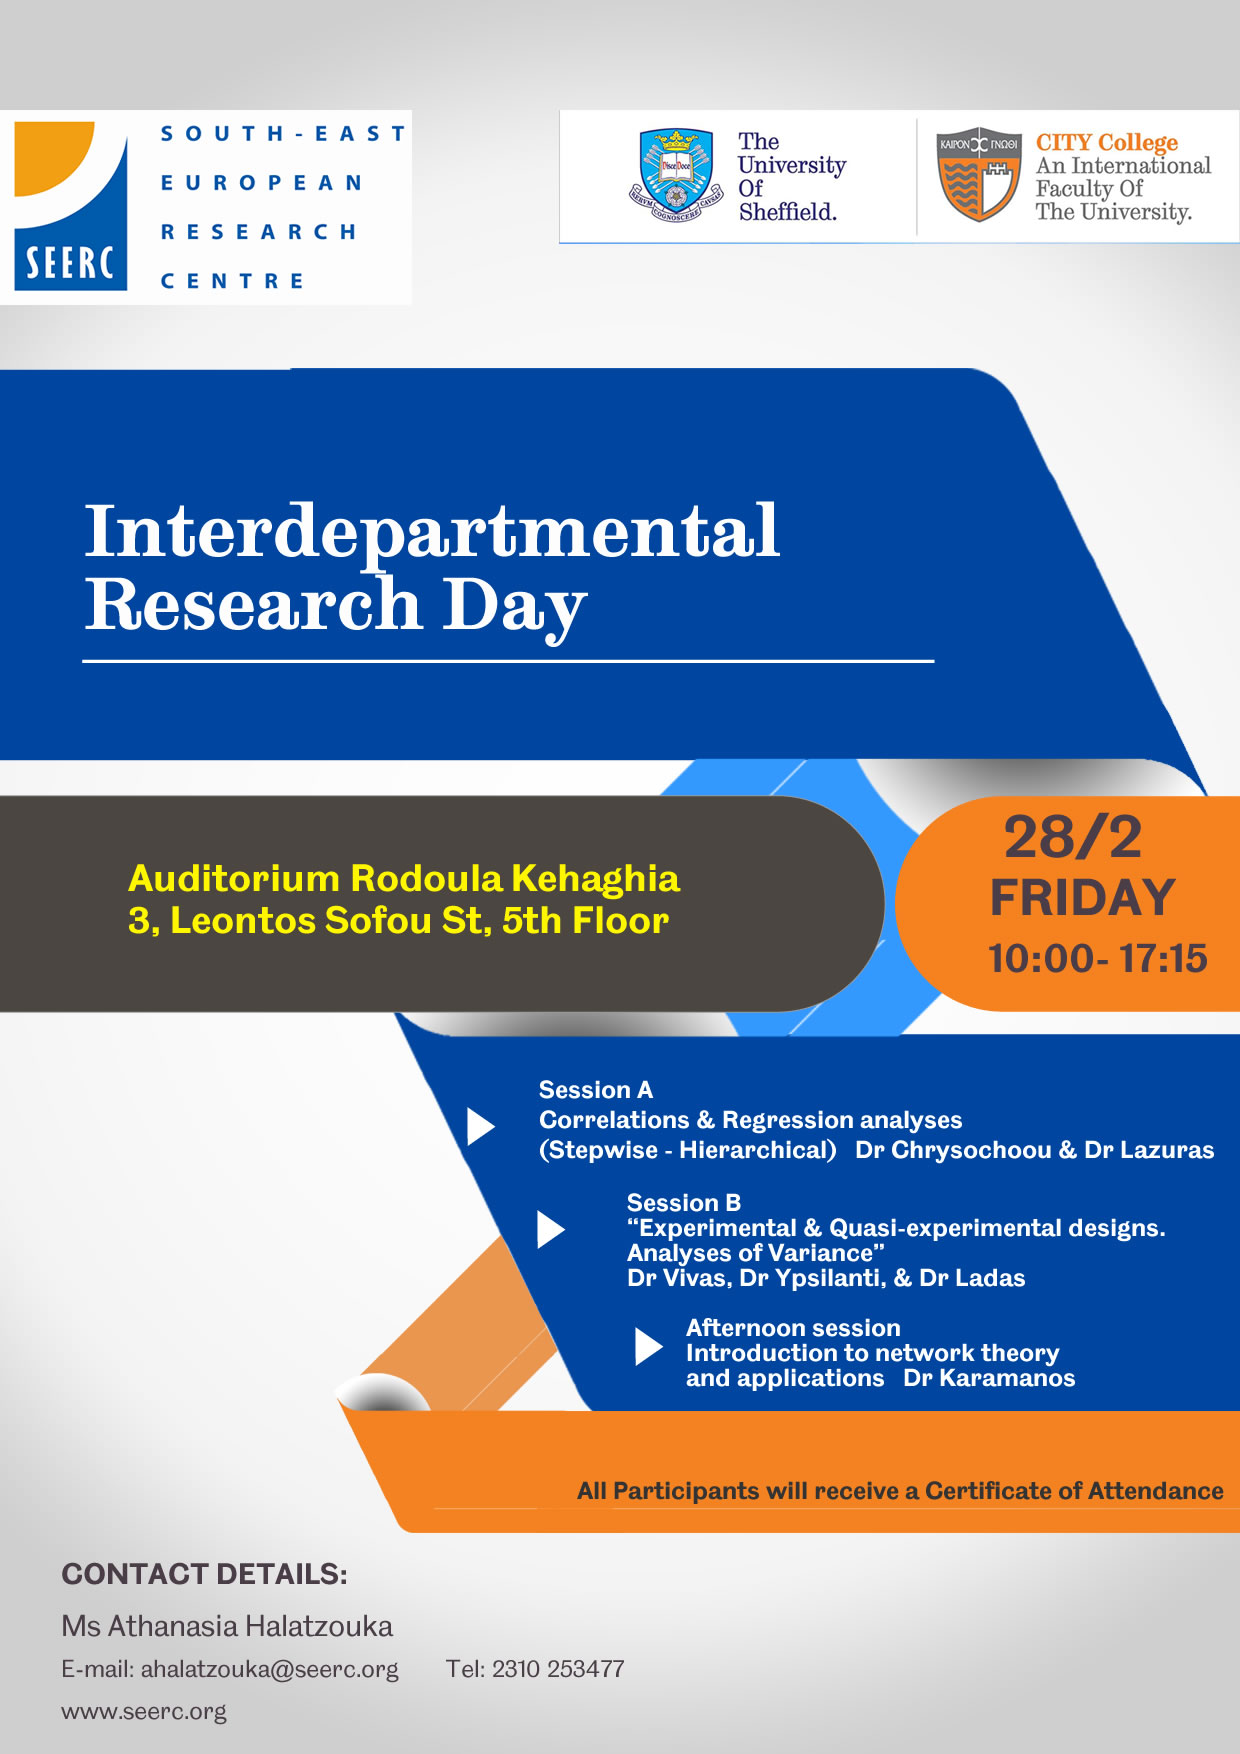 Interdepartmental Research Day, February 28th, 2014